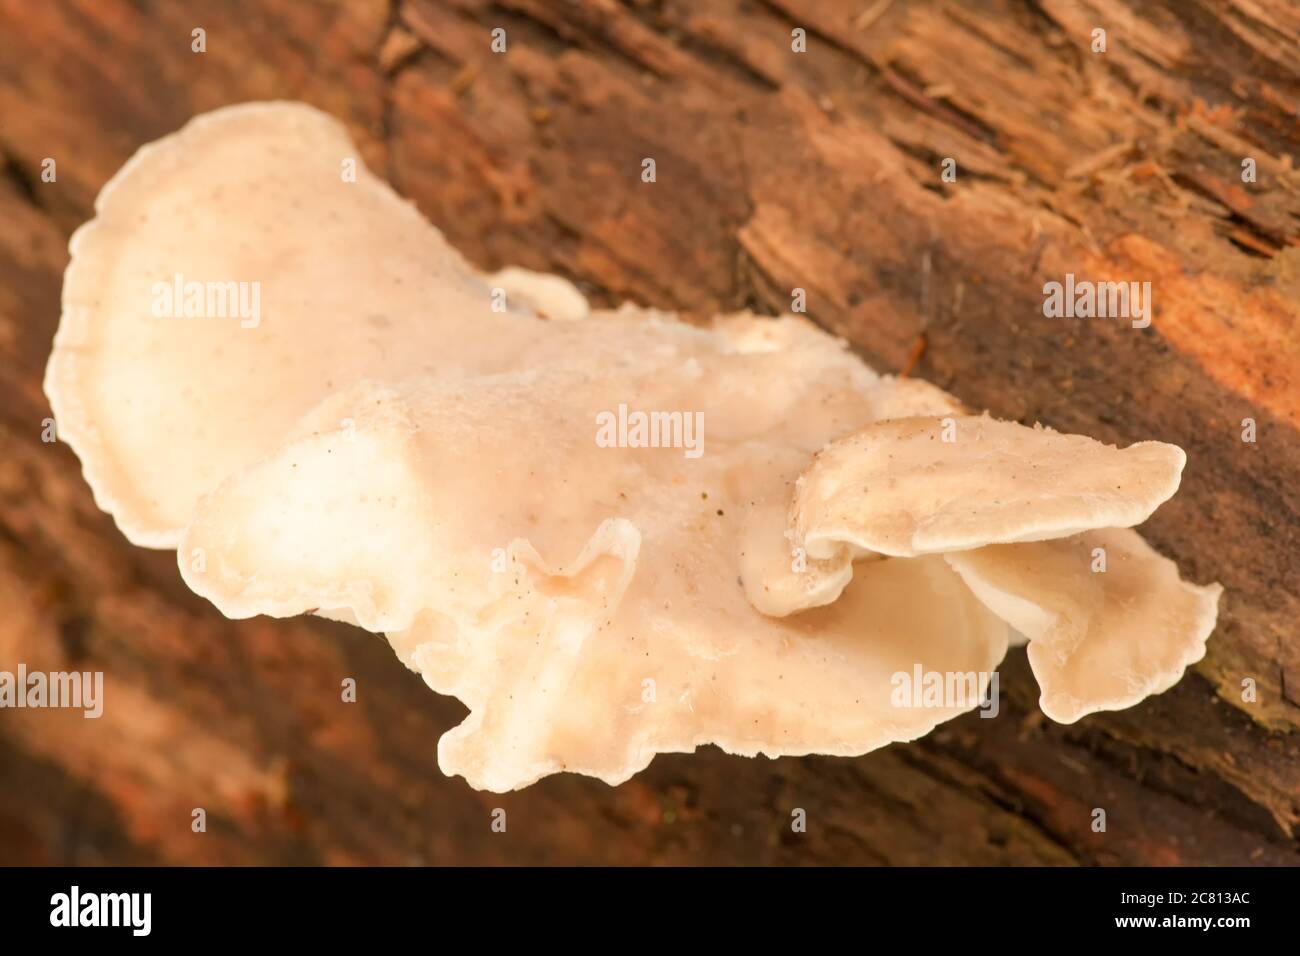 Oyster Mushrooms are a choice edible mushroom in the polypores group of mushrooms  mushroom in Mirrorwmont Park in Issaquah, WA Stock Photo